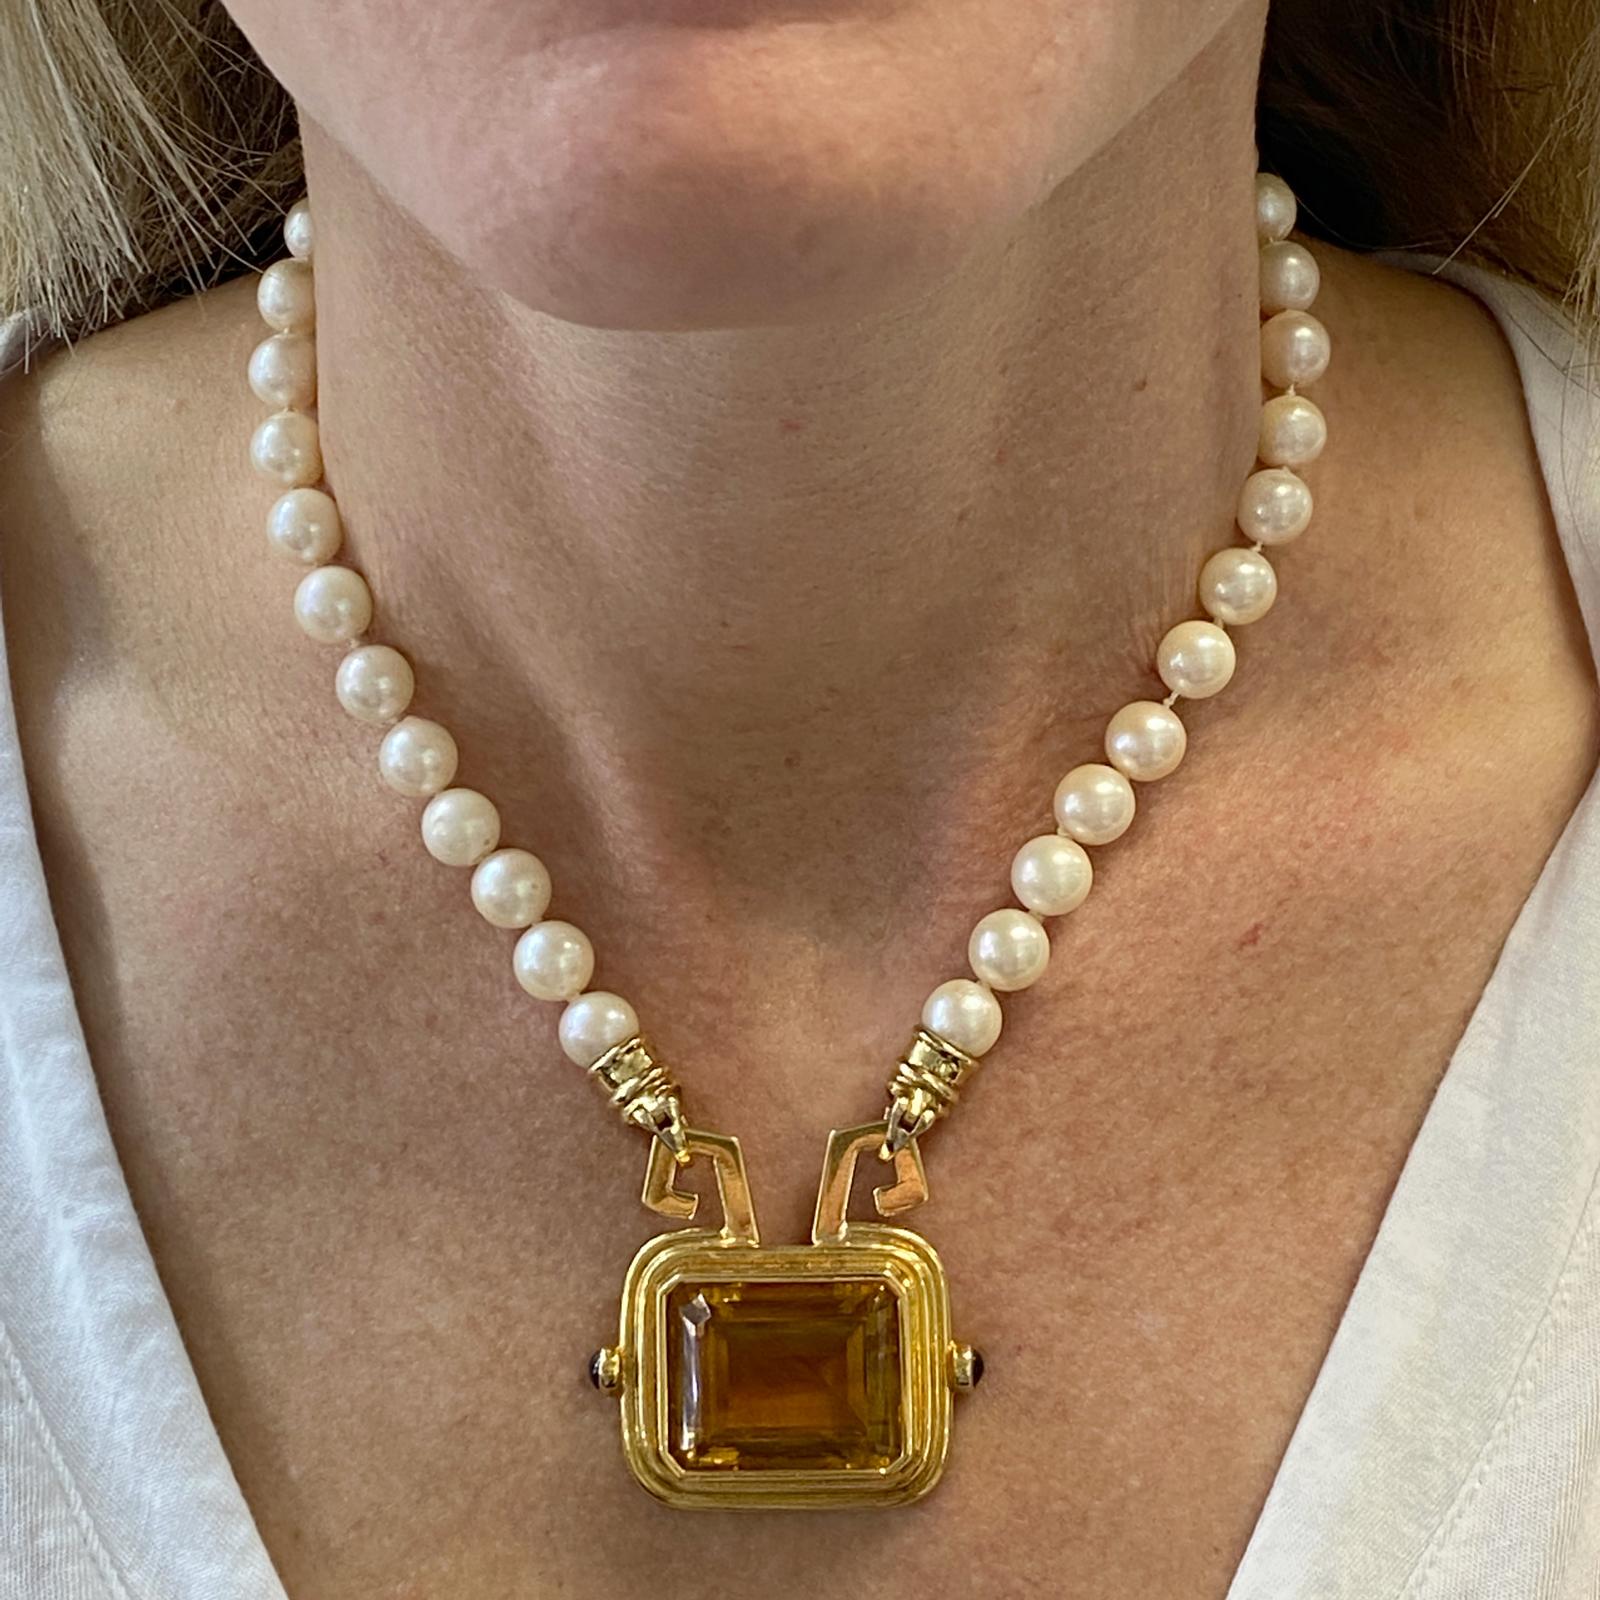 Beautiful honey citrine gemstone pendant fashioned in 18 karat yellow gold. The detachable pendant is connected to a cultured pearl necklace. The white cultured pearls measure 8-8.4mm, and the necklace measures 16 inches in length. The pendant